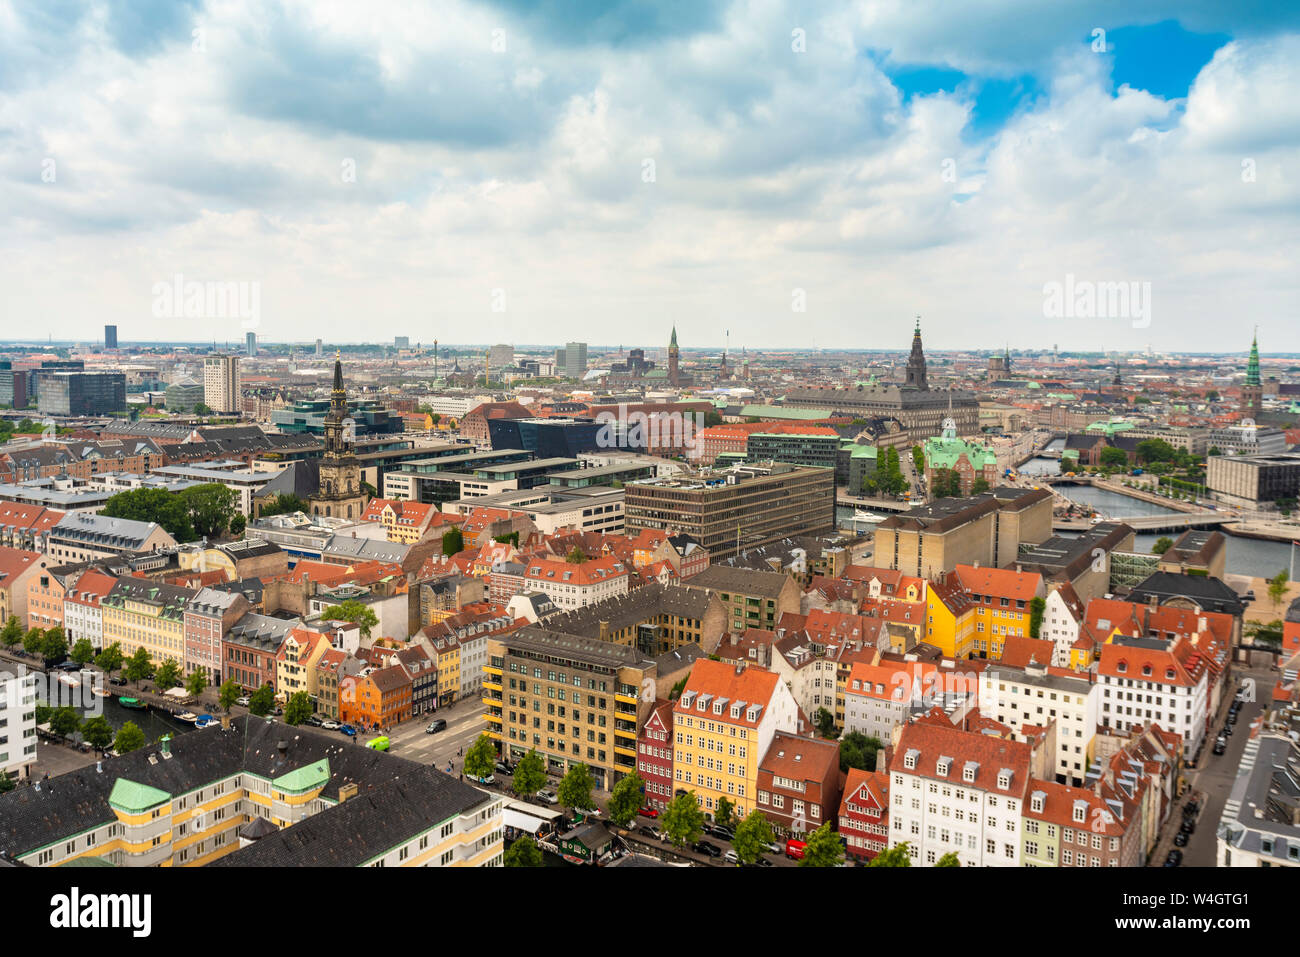 View of city center from above from Church of Our Saviour, Copenhagen, Denmark Stock Photo